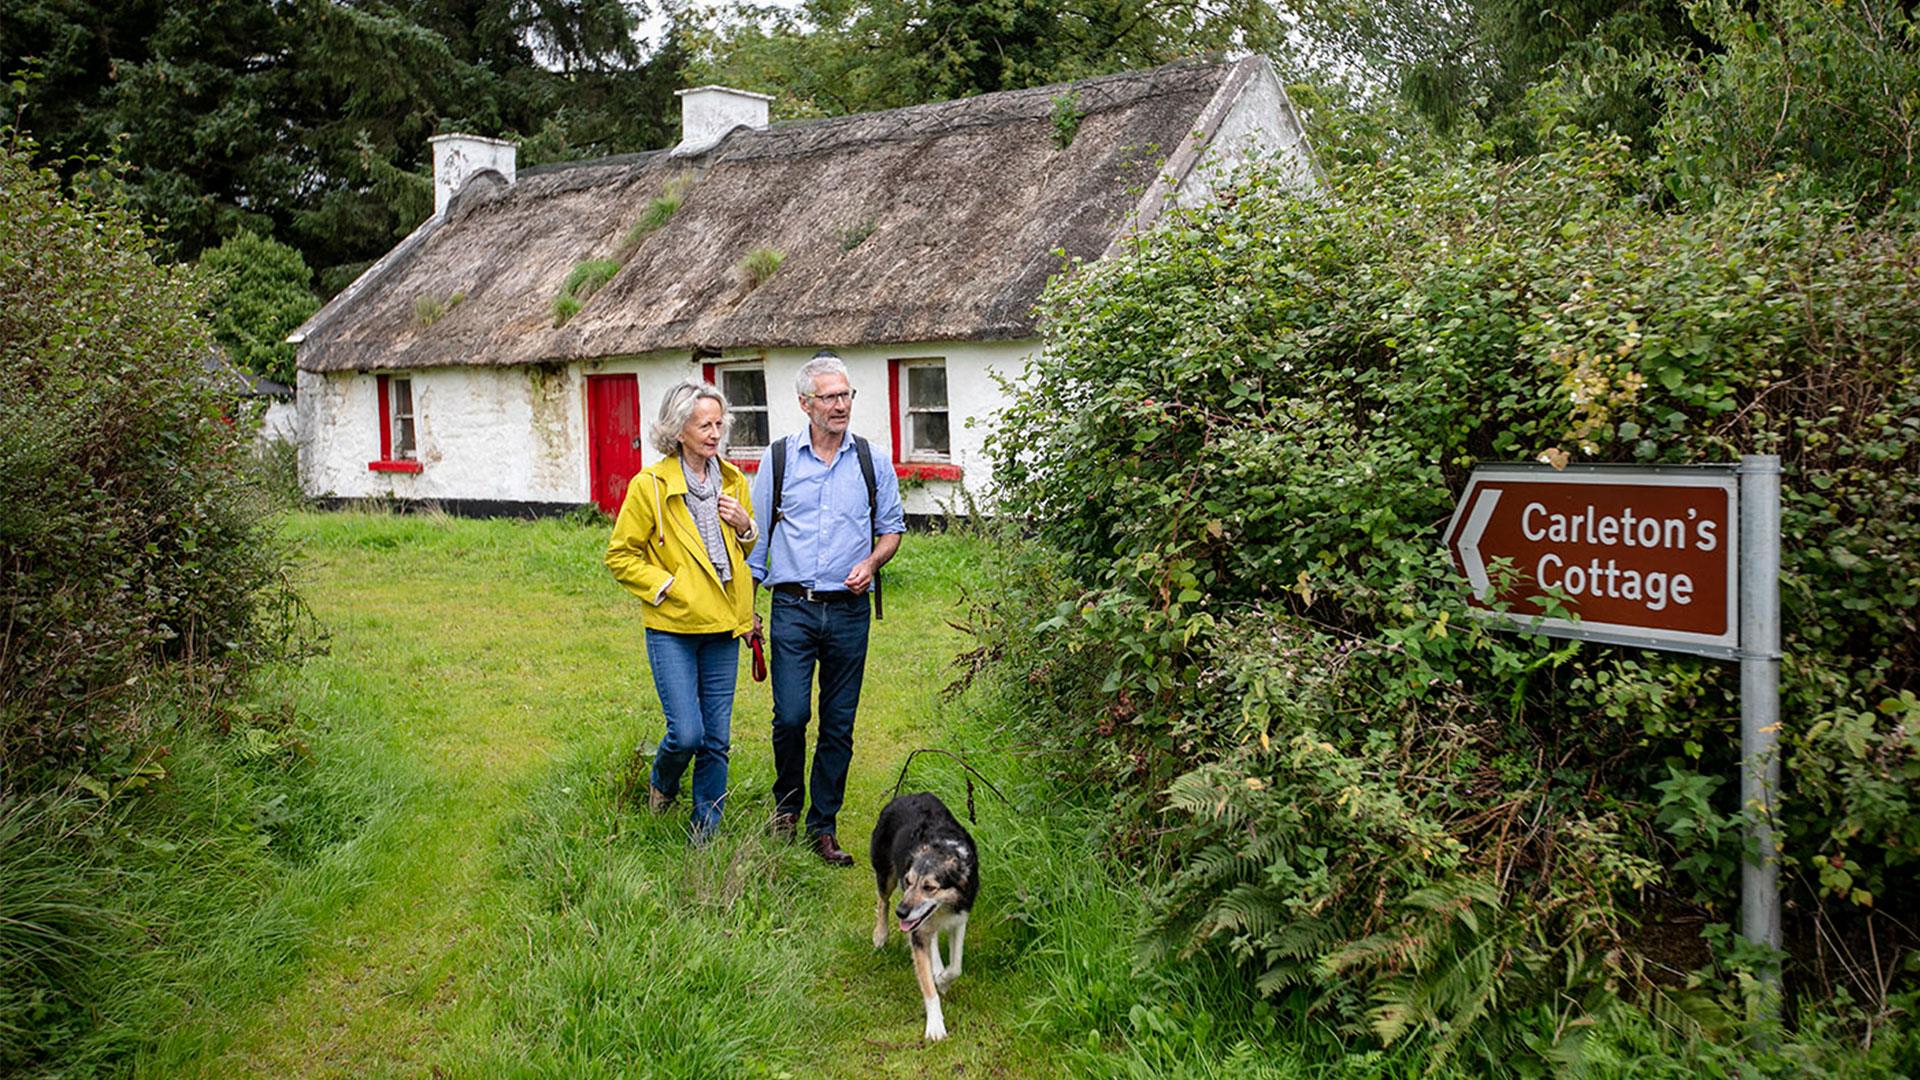 A mature couple and their dog walk through grass away from an Irish thatched cottage.